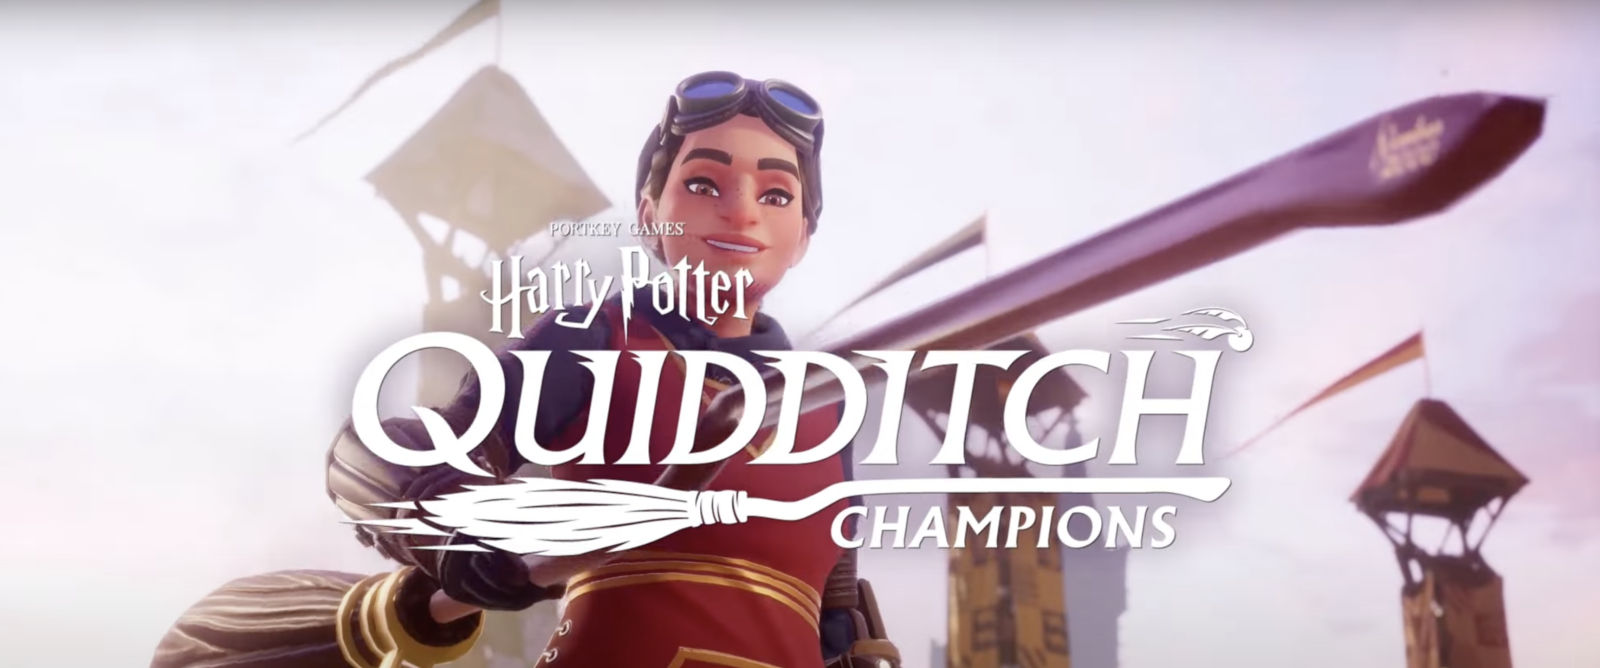 Harry Potter: Quidditch Champions brings the wizarding sport to gamers